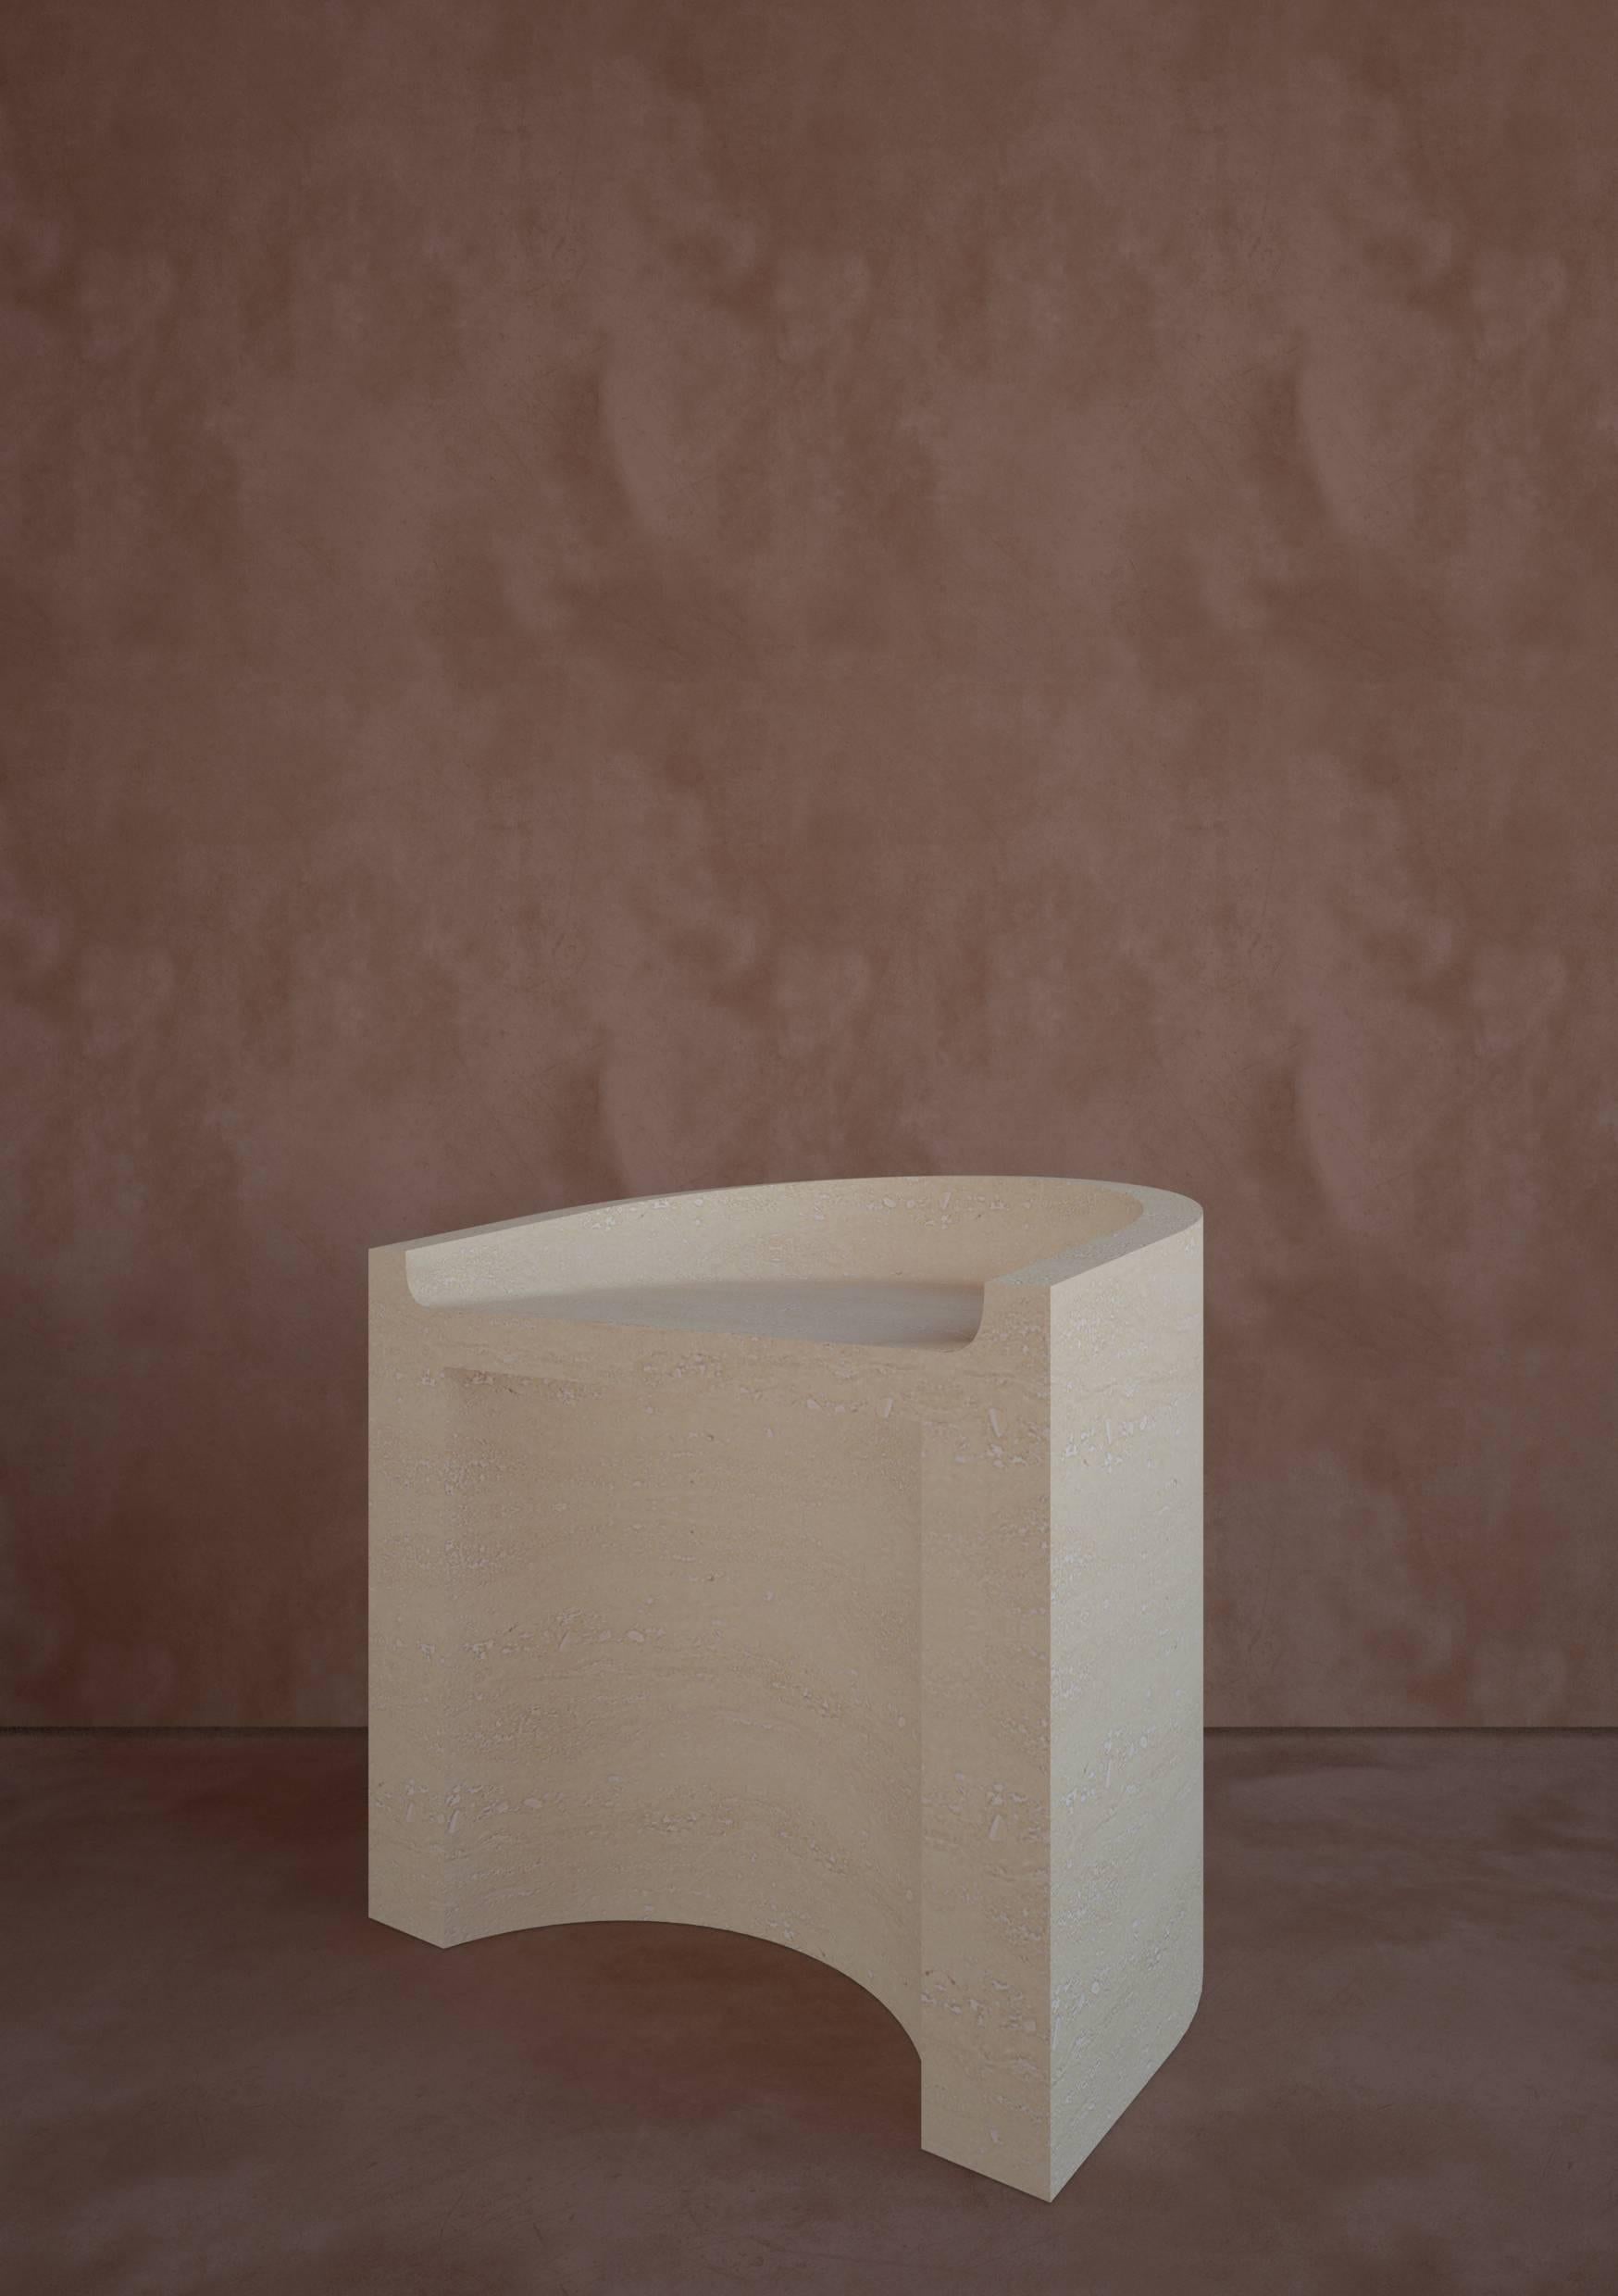 Atlas chair made by Valériane Lazard & Paul Brissonnet, is the first piece of their new collaboration. This minimal chair is made in Massangis stone (French quarry), a particular roc located in Massangis, France. 
In light beige, the Atlas Chair